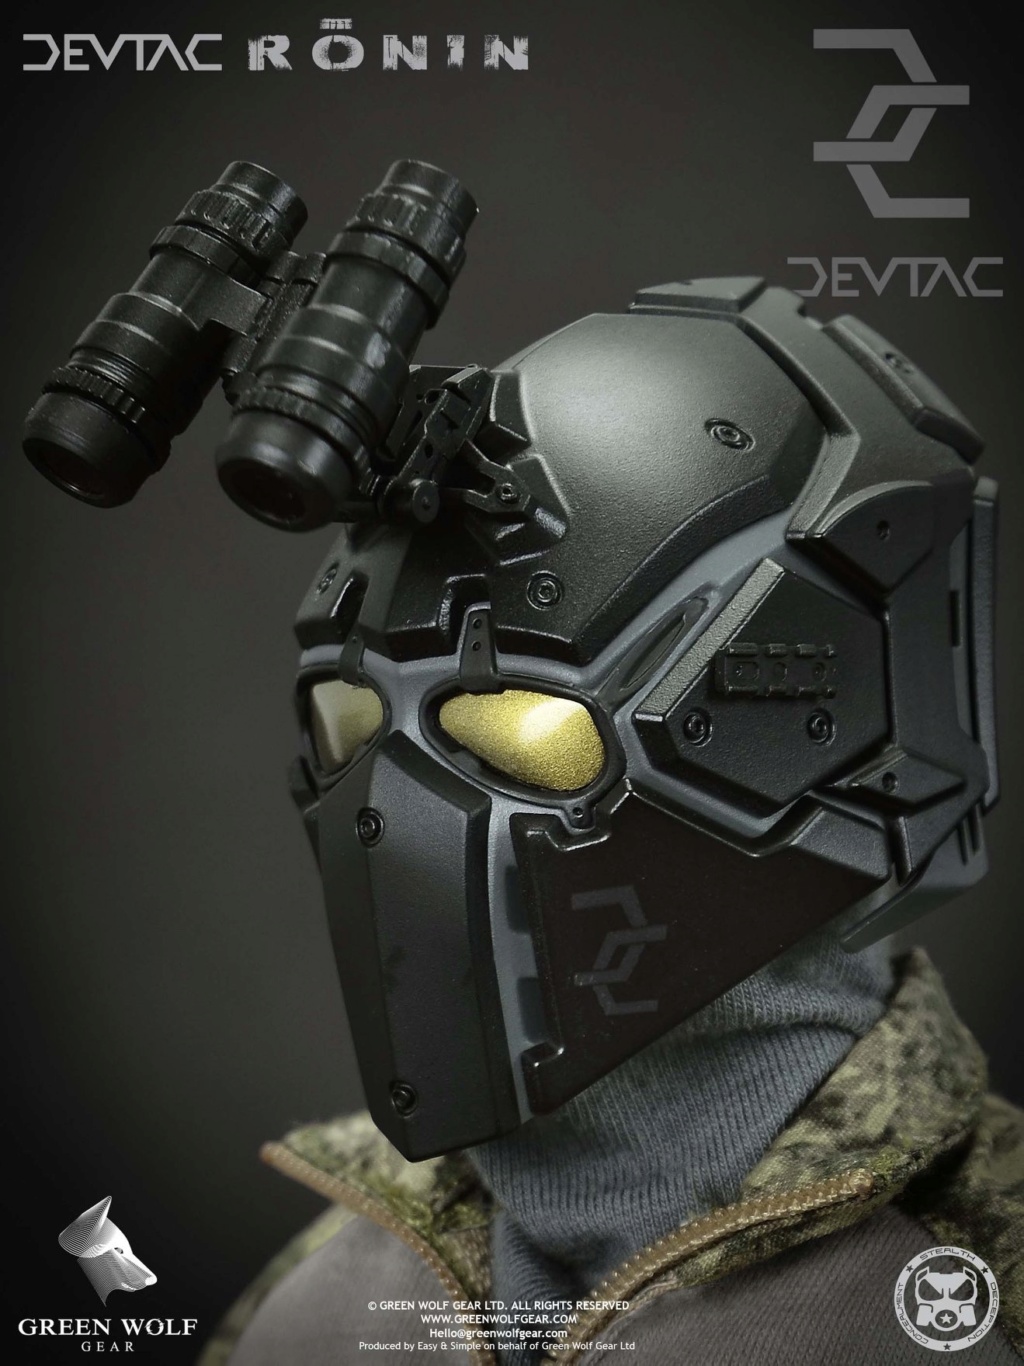 Ronin - NEW PRODUCT: Green Wolf Gear DEVTAC Ronin 1/6 Action Figure (VS2434P) 1340